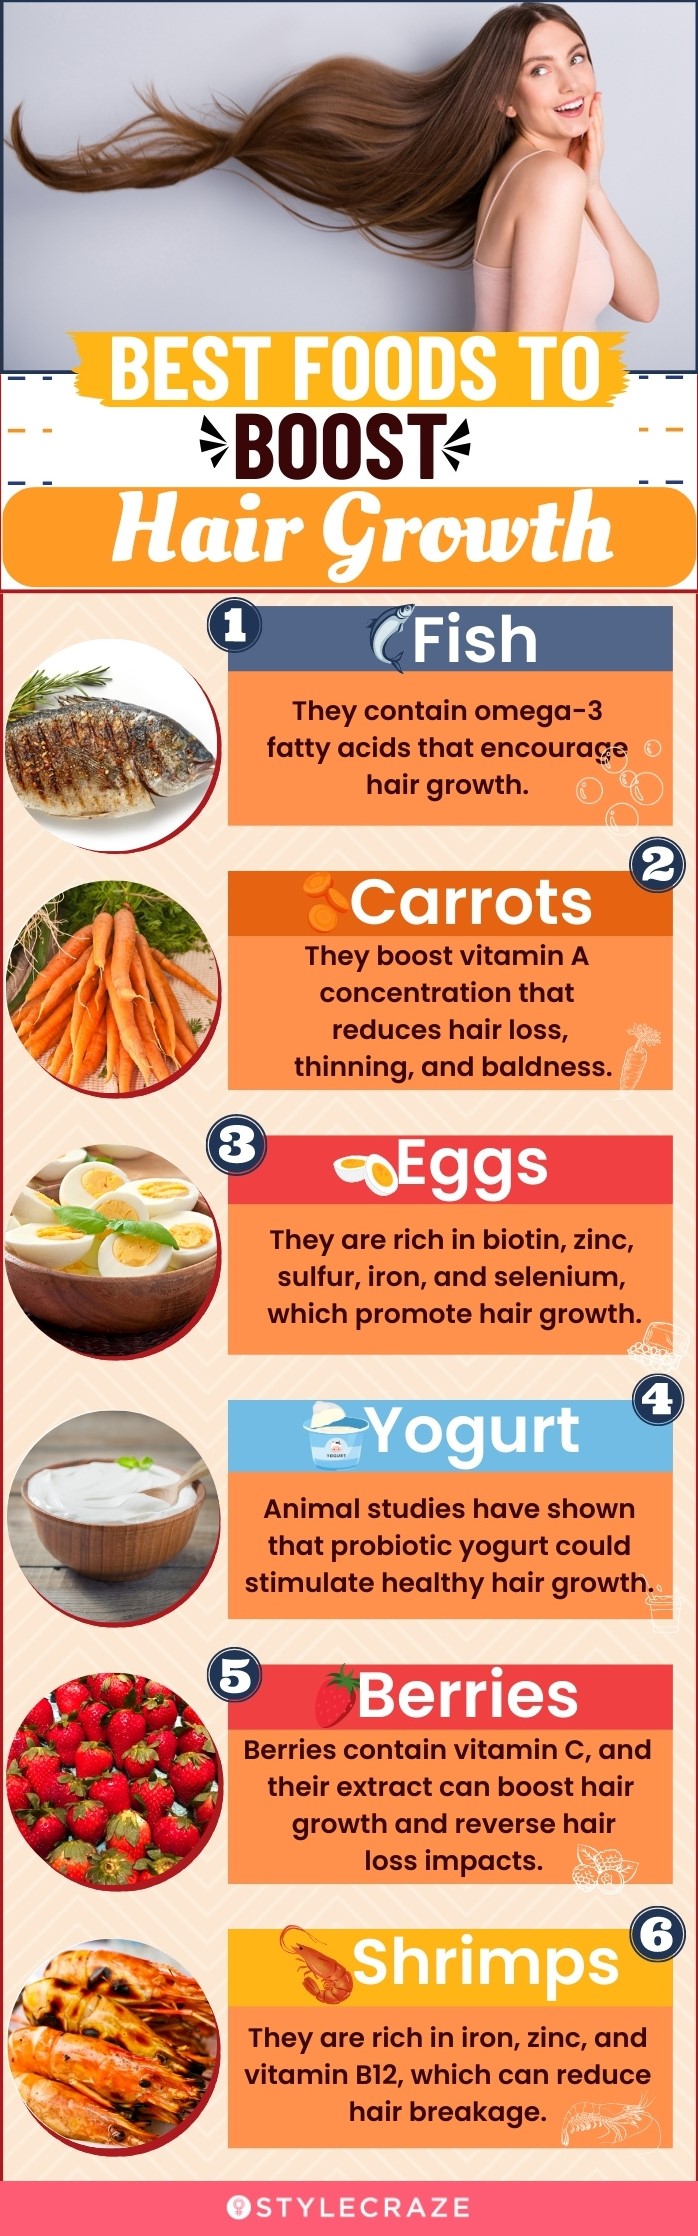 Eat These Foods For Healthy Hair | Femina.in